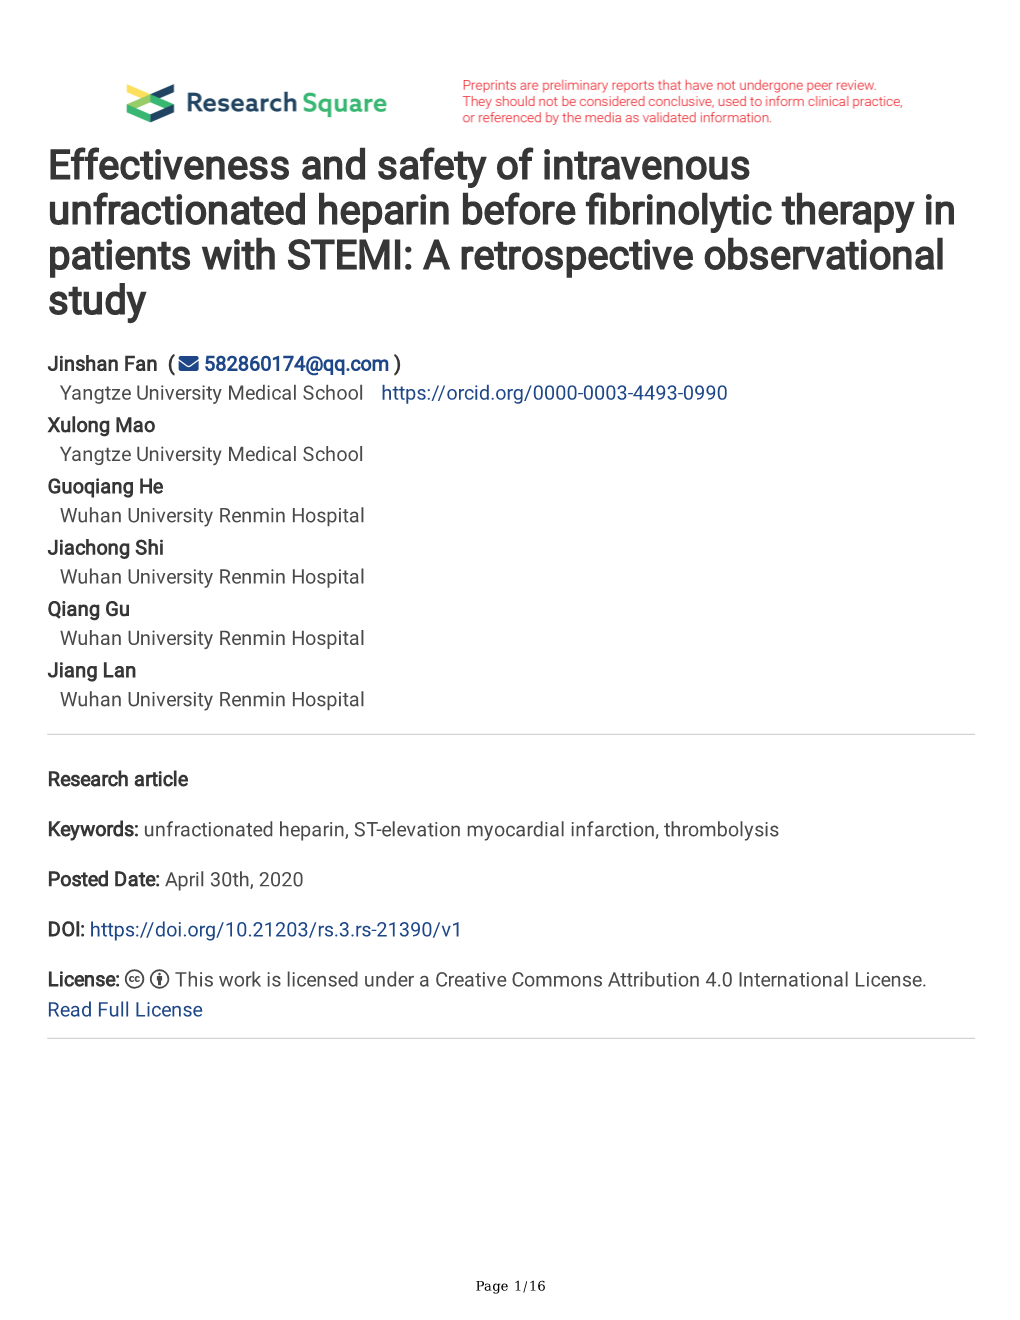 Effectiveness and Safety of Intravenous Unfractionated Heparin Before Fbrinolytic Therapy in Patients with STEMI: a Retrospective Observational Study